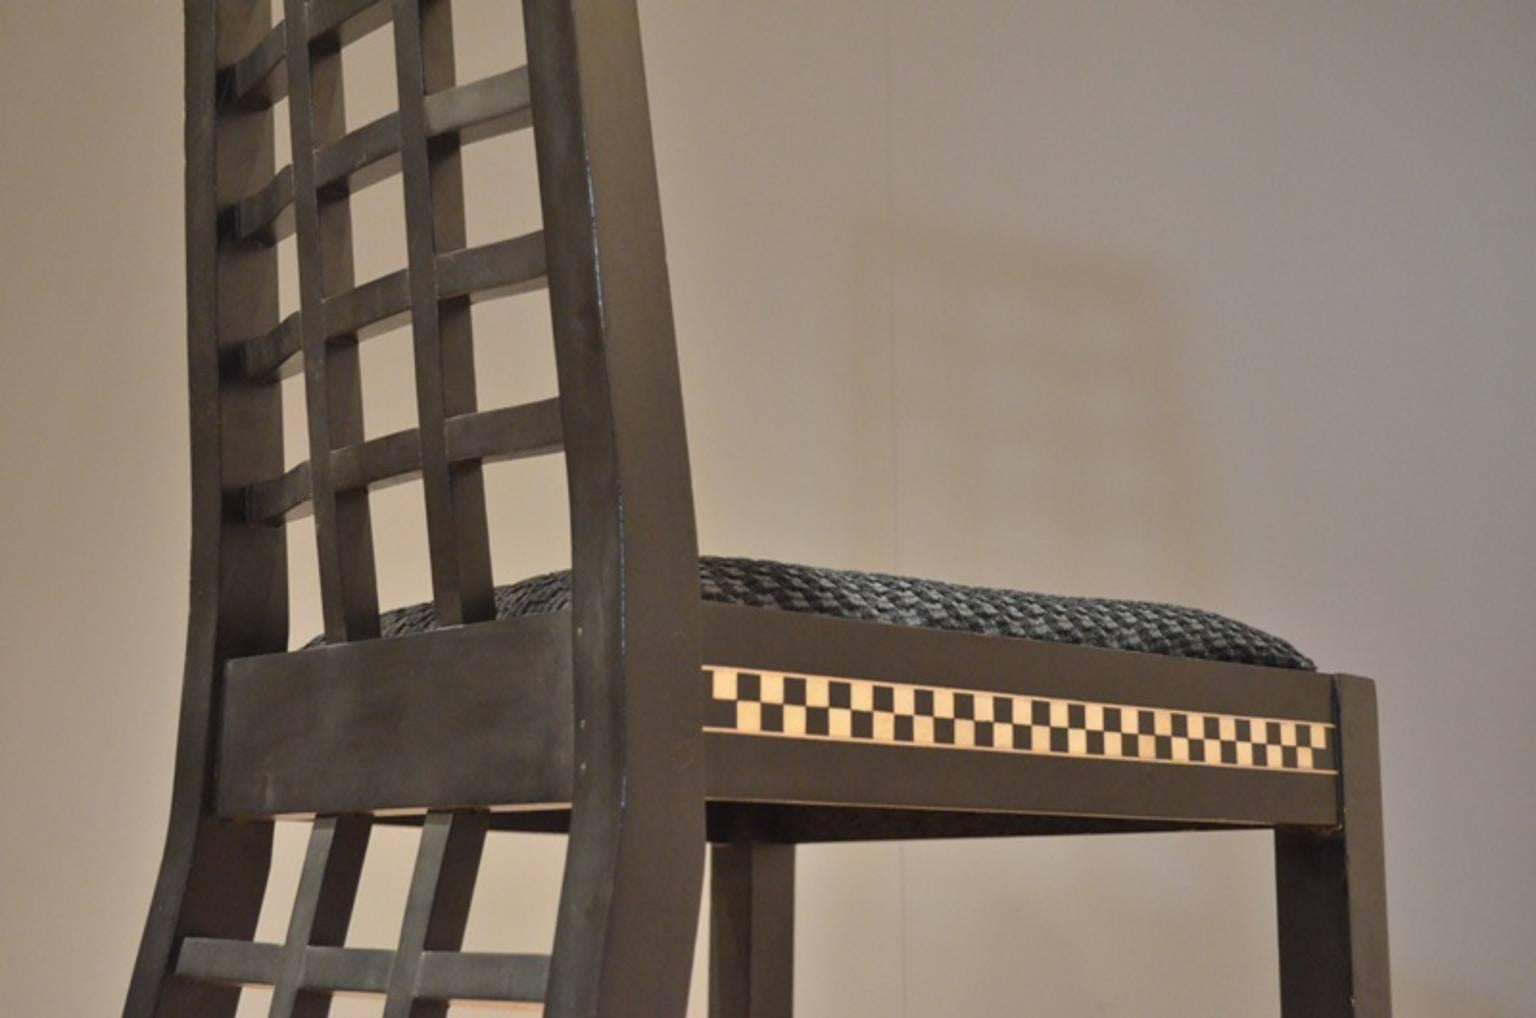 Rare set of 4 Charles Rennie Mackintosh style dining chairs. According to period specialist, they are clearly English crafted - by or in the style of Mackintosh. They date from the 1930s. The structure is black painted ebonized wood with amazing